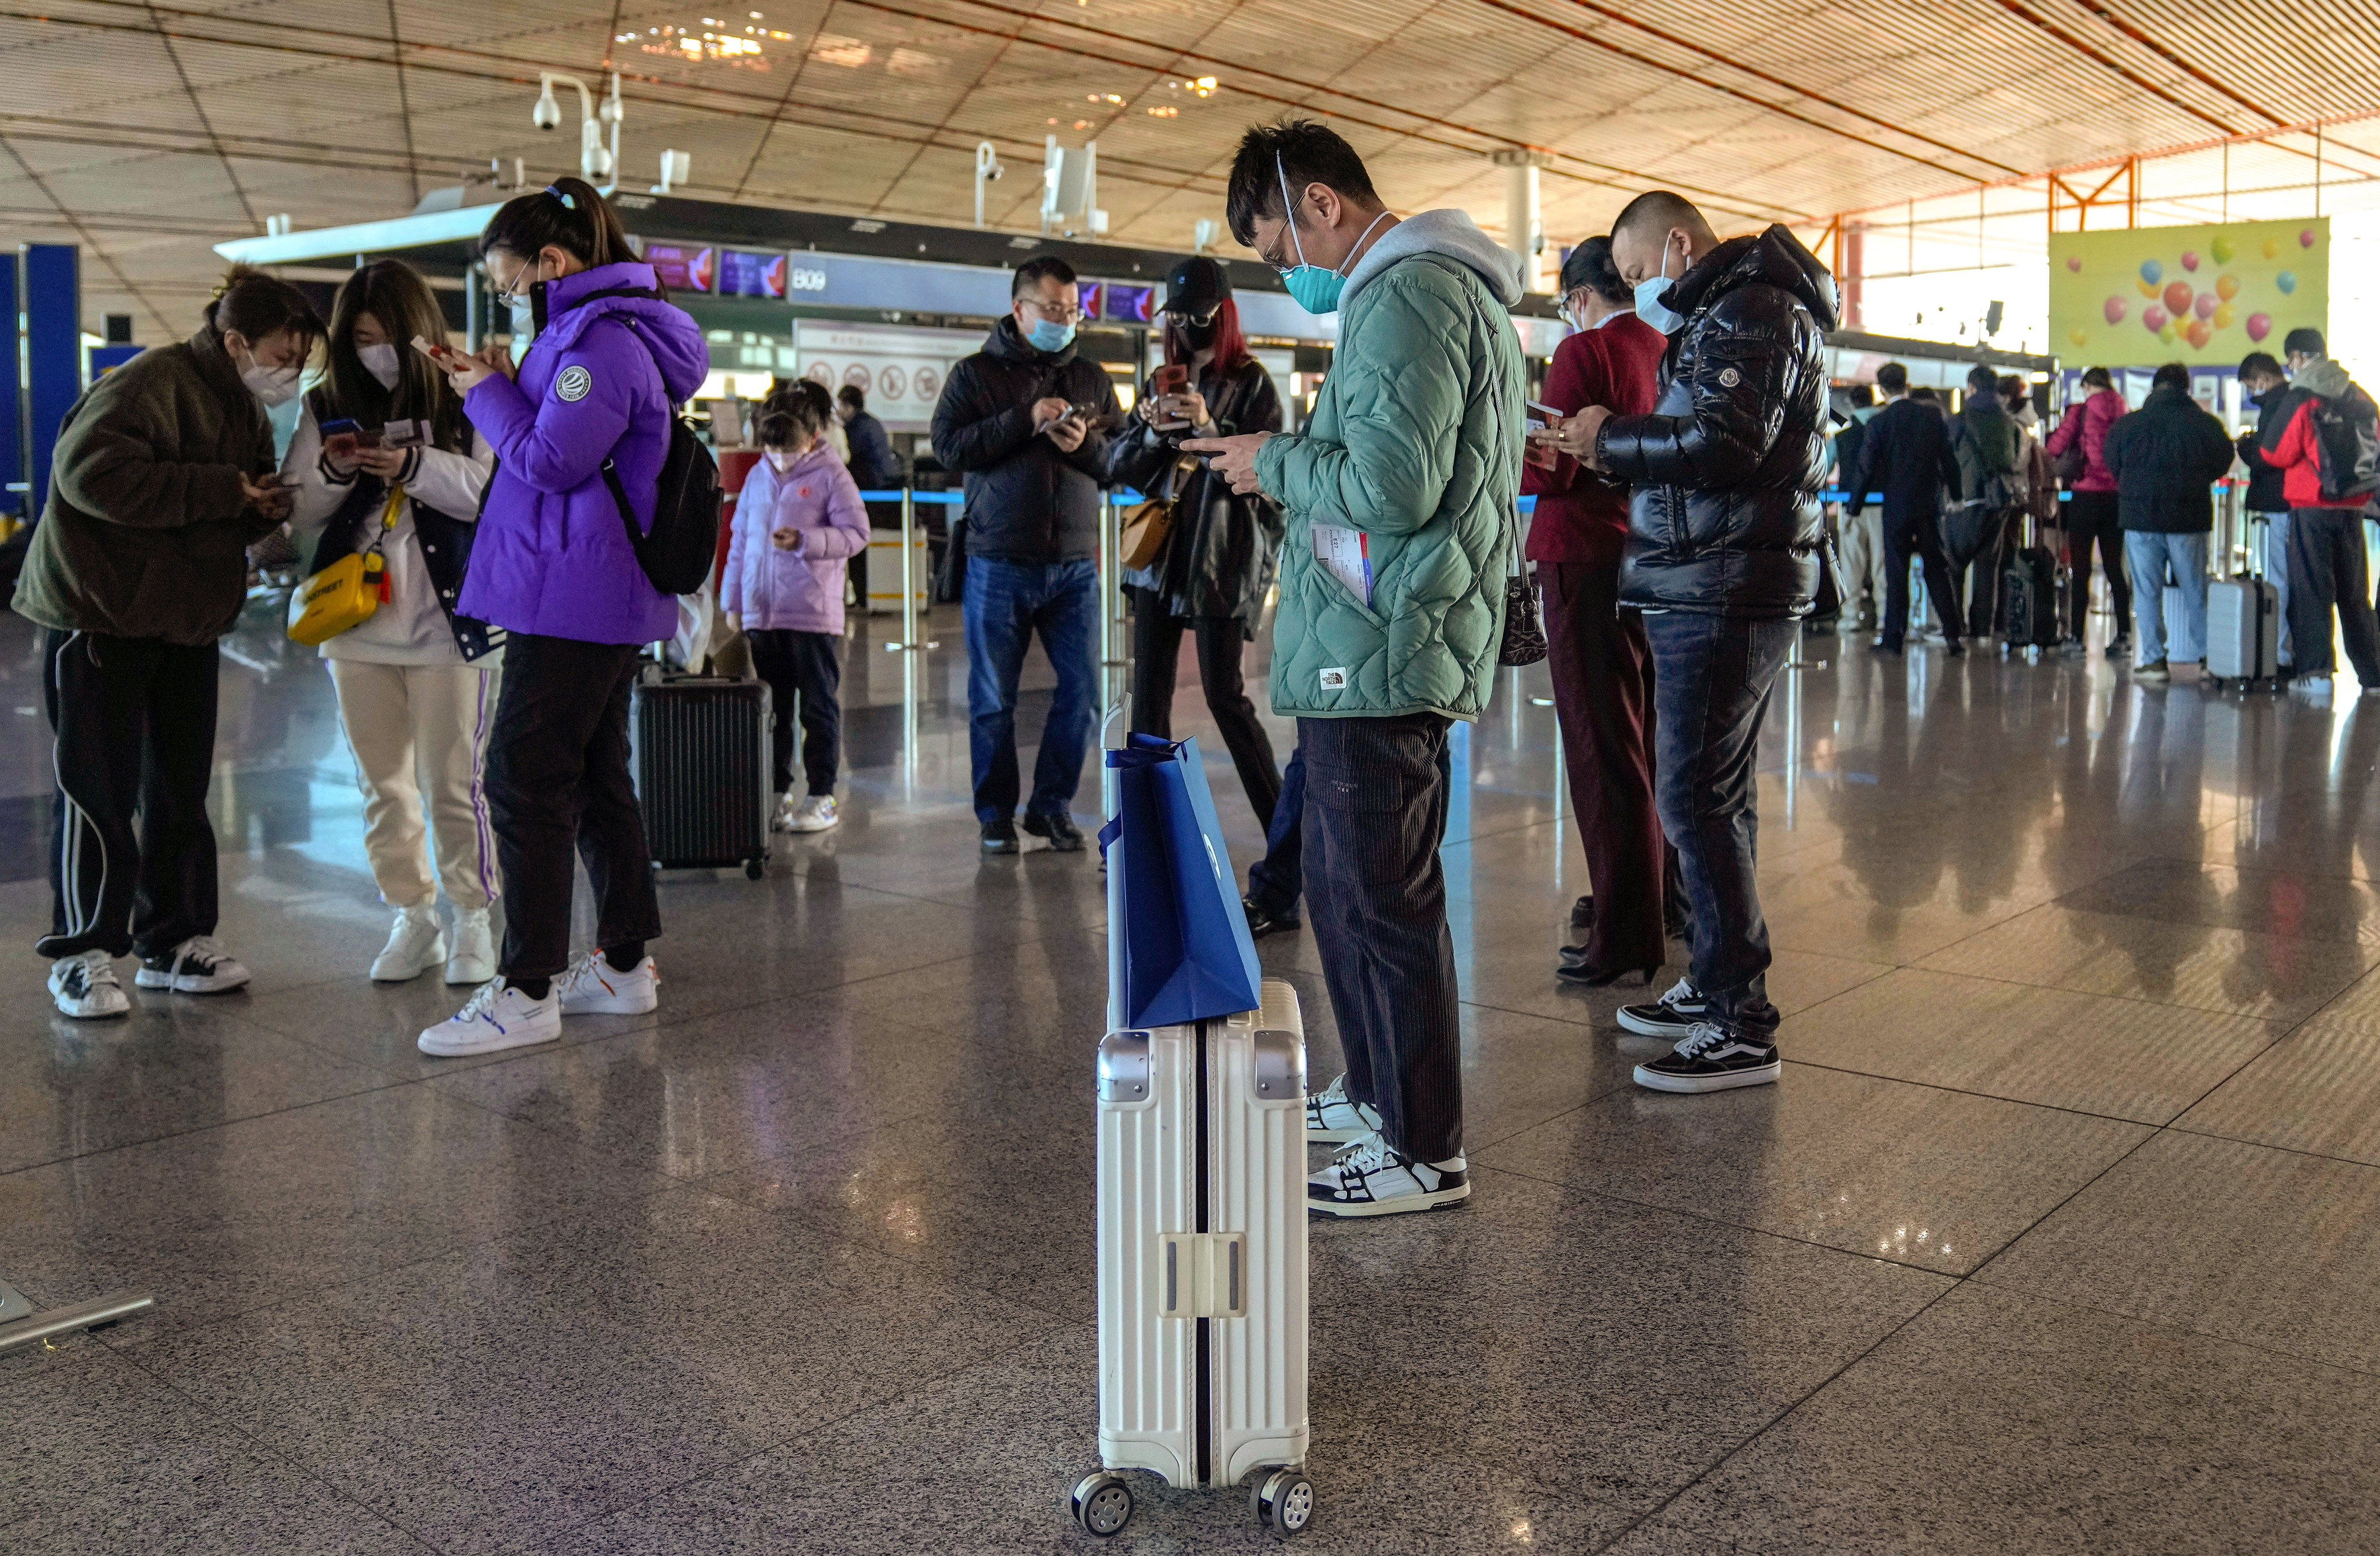 China has announced that it will lift restrictions on travel overseas next month. Photo: AP